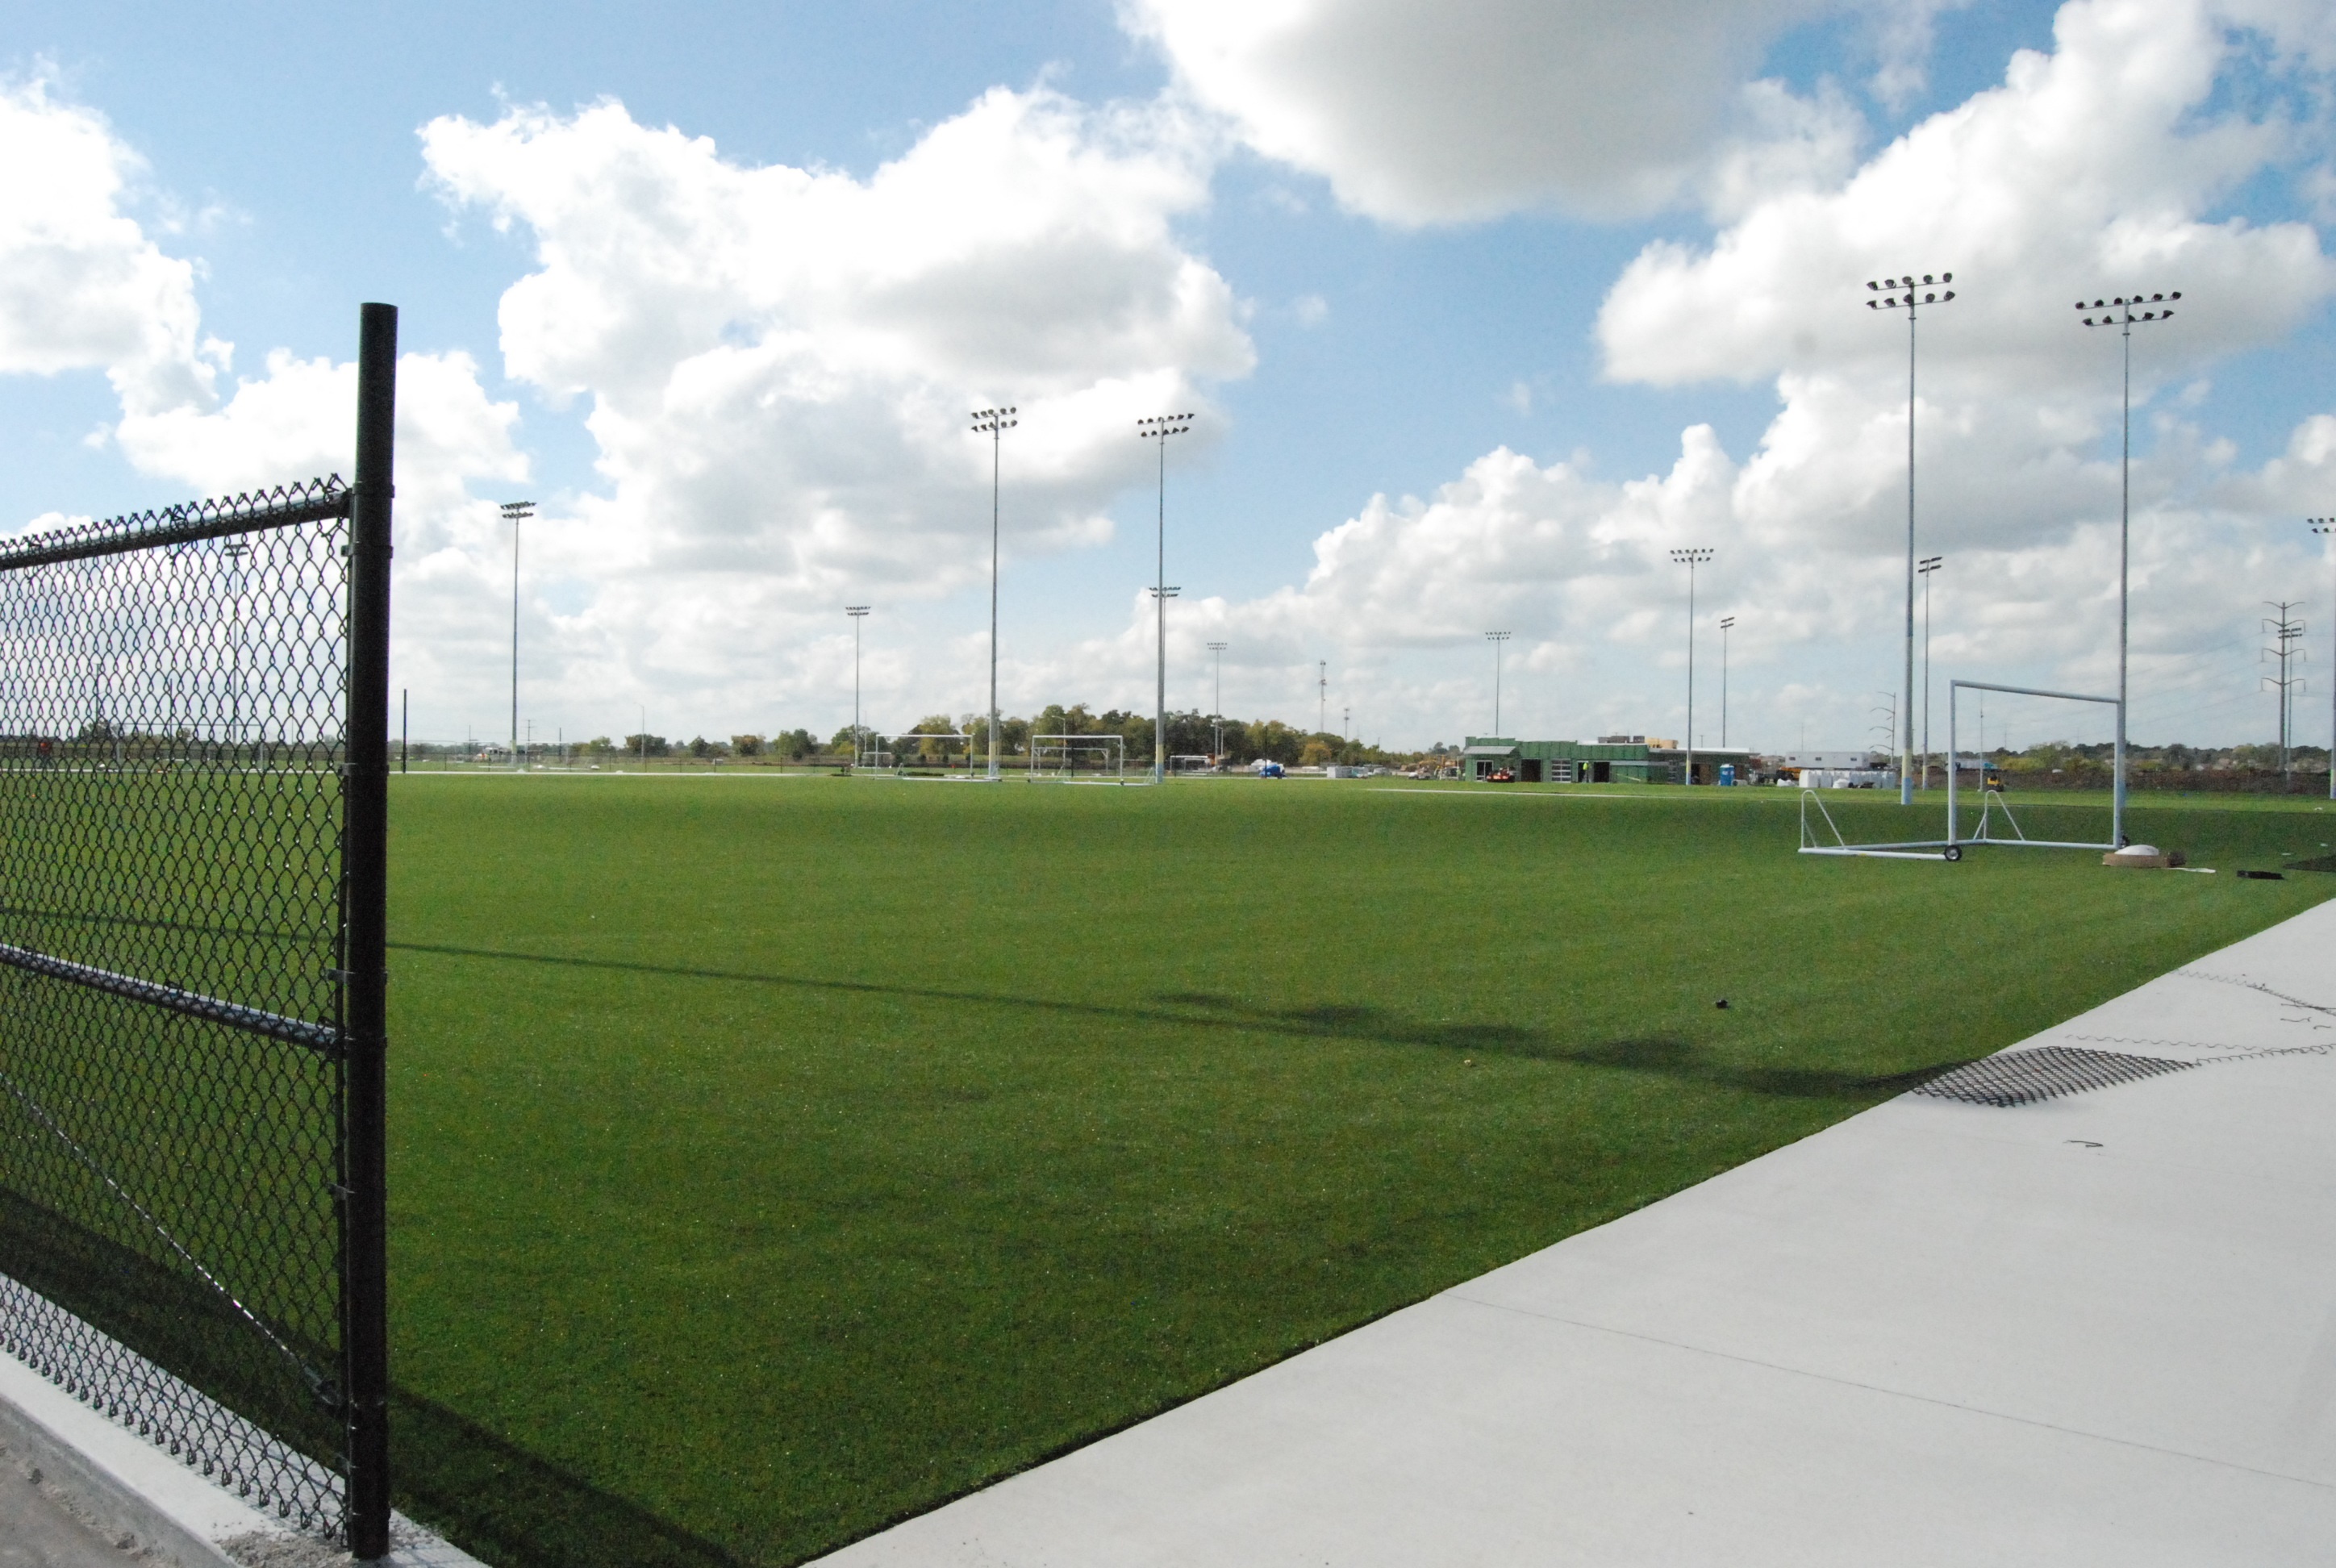 spots field with lighting and green grass